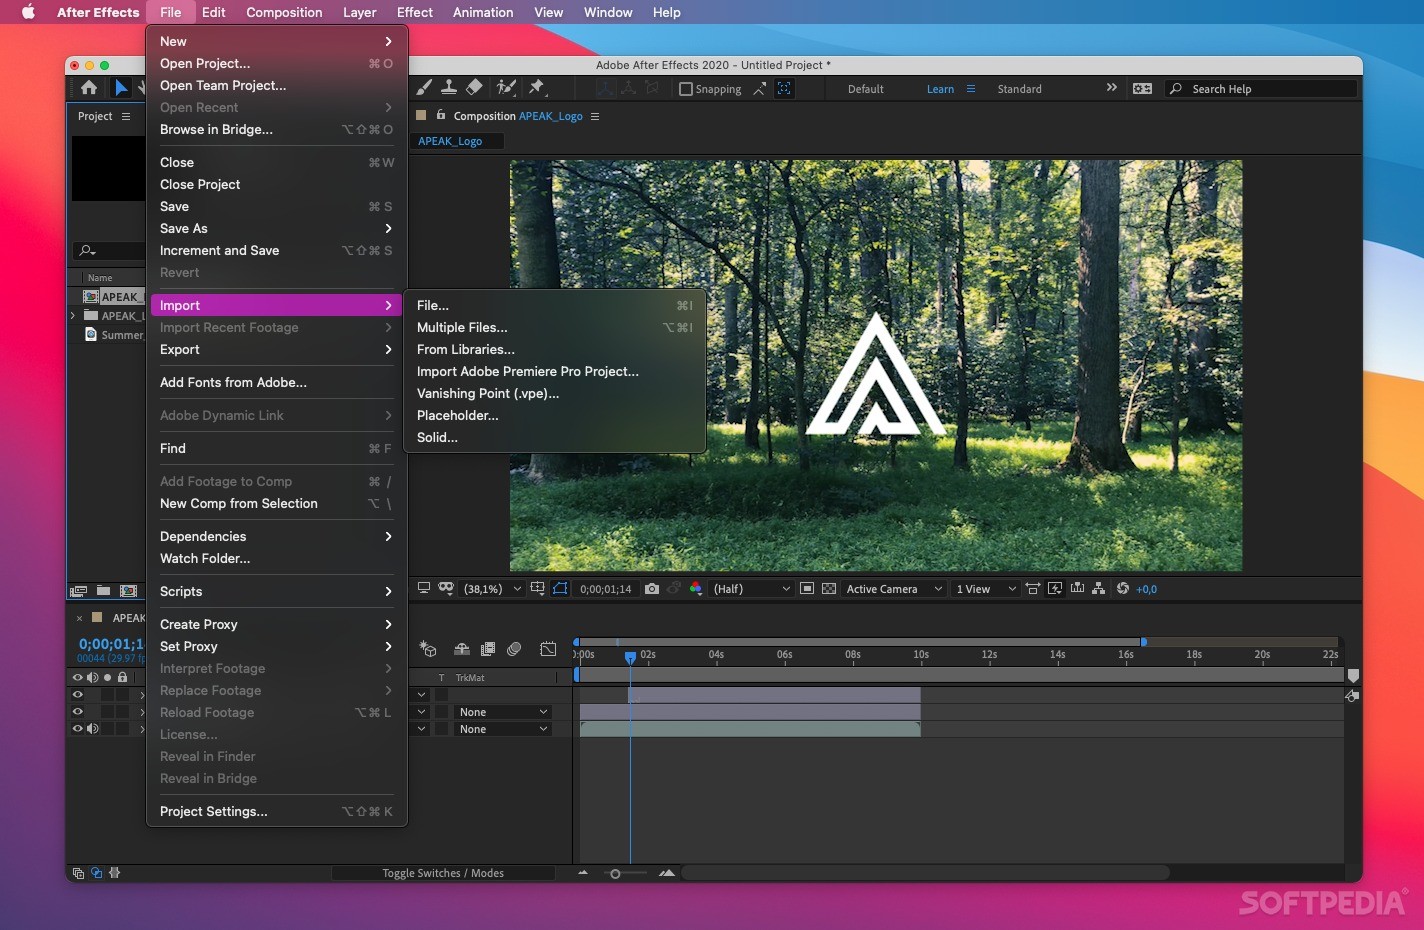 whats the adobe after effects option for mac